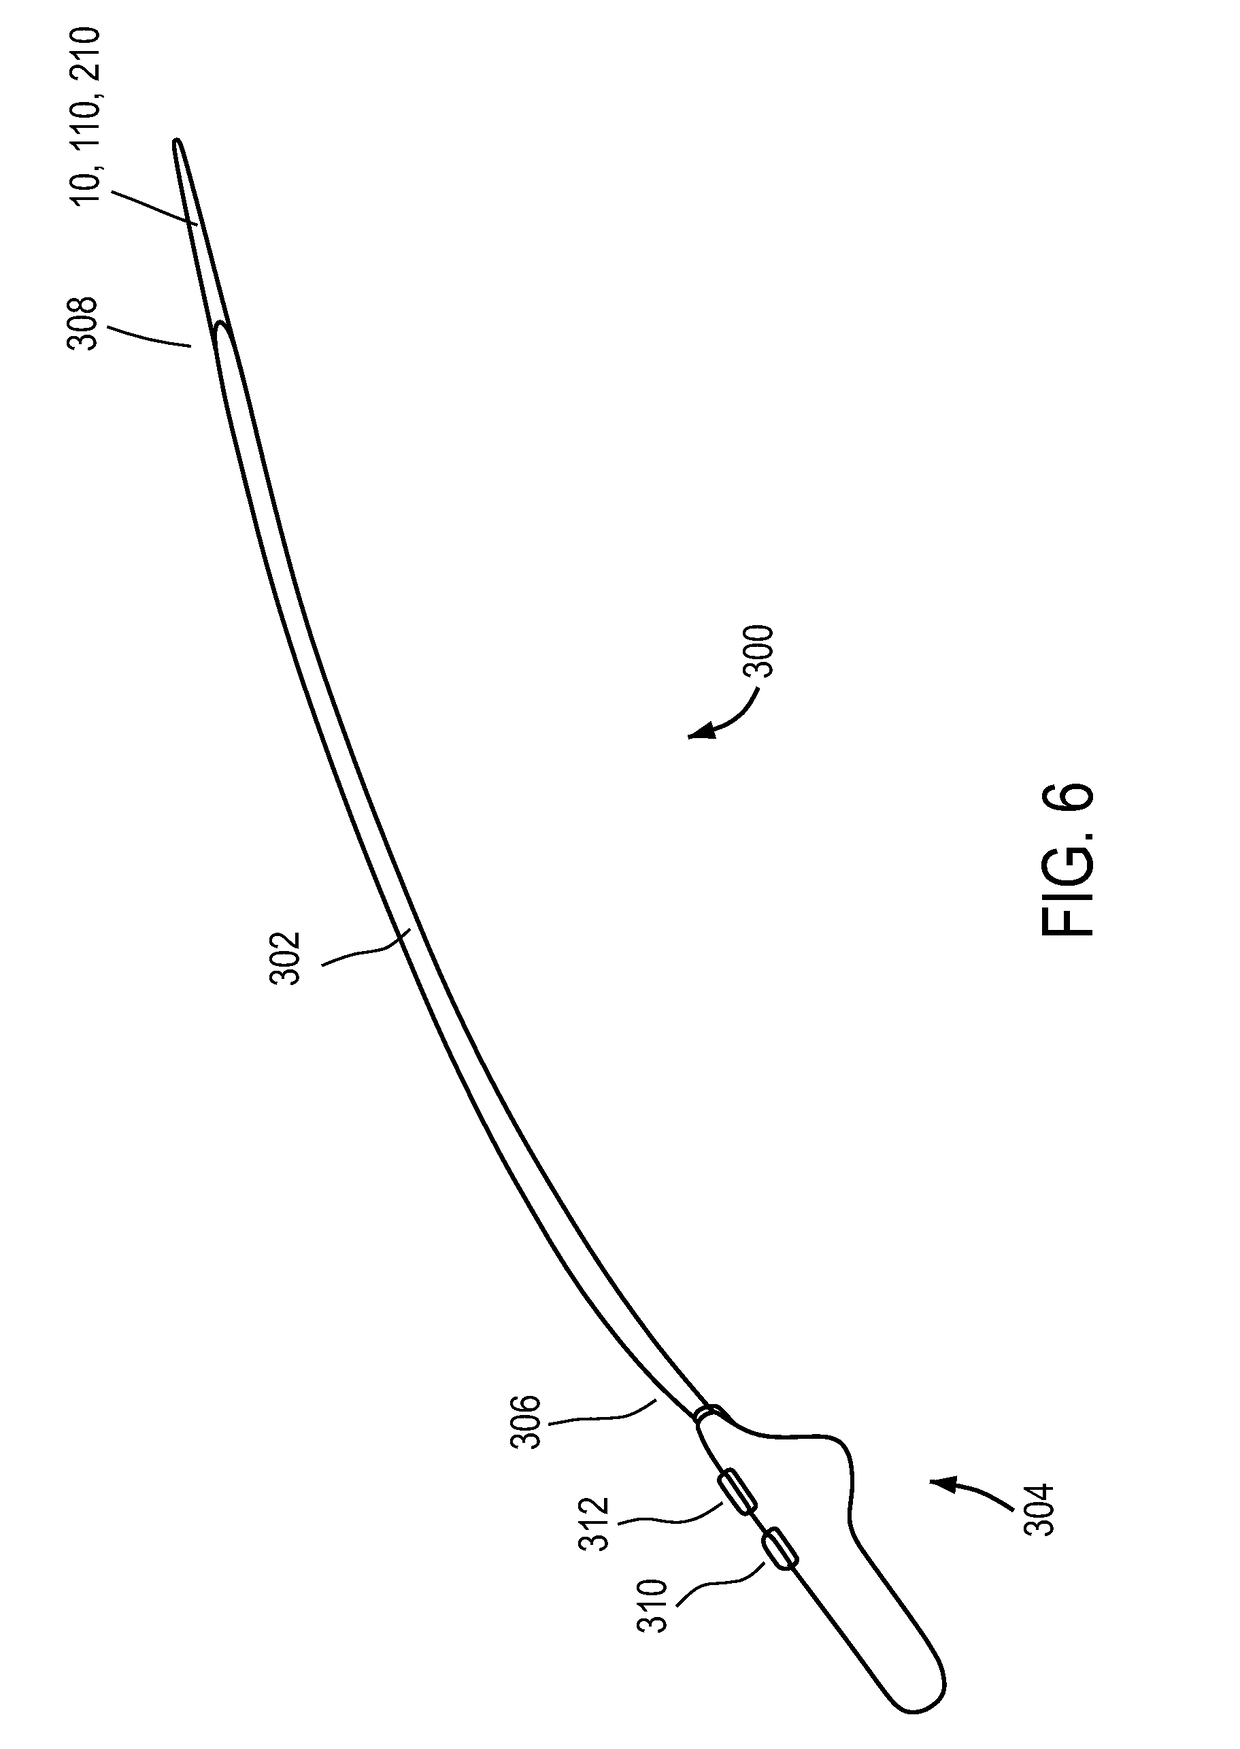 Method and apparatus for endometrial ablation in combination with intrafallopian contraceptive devices